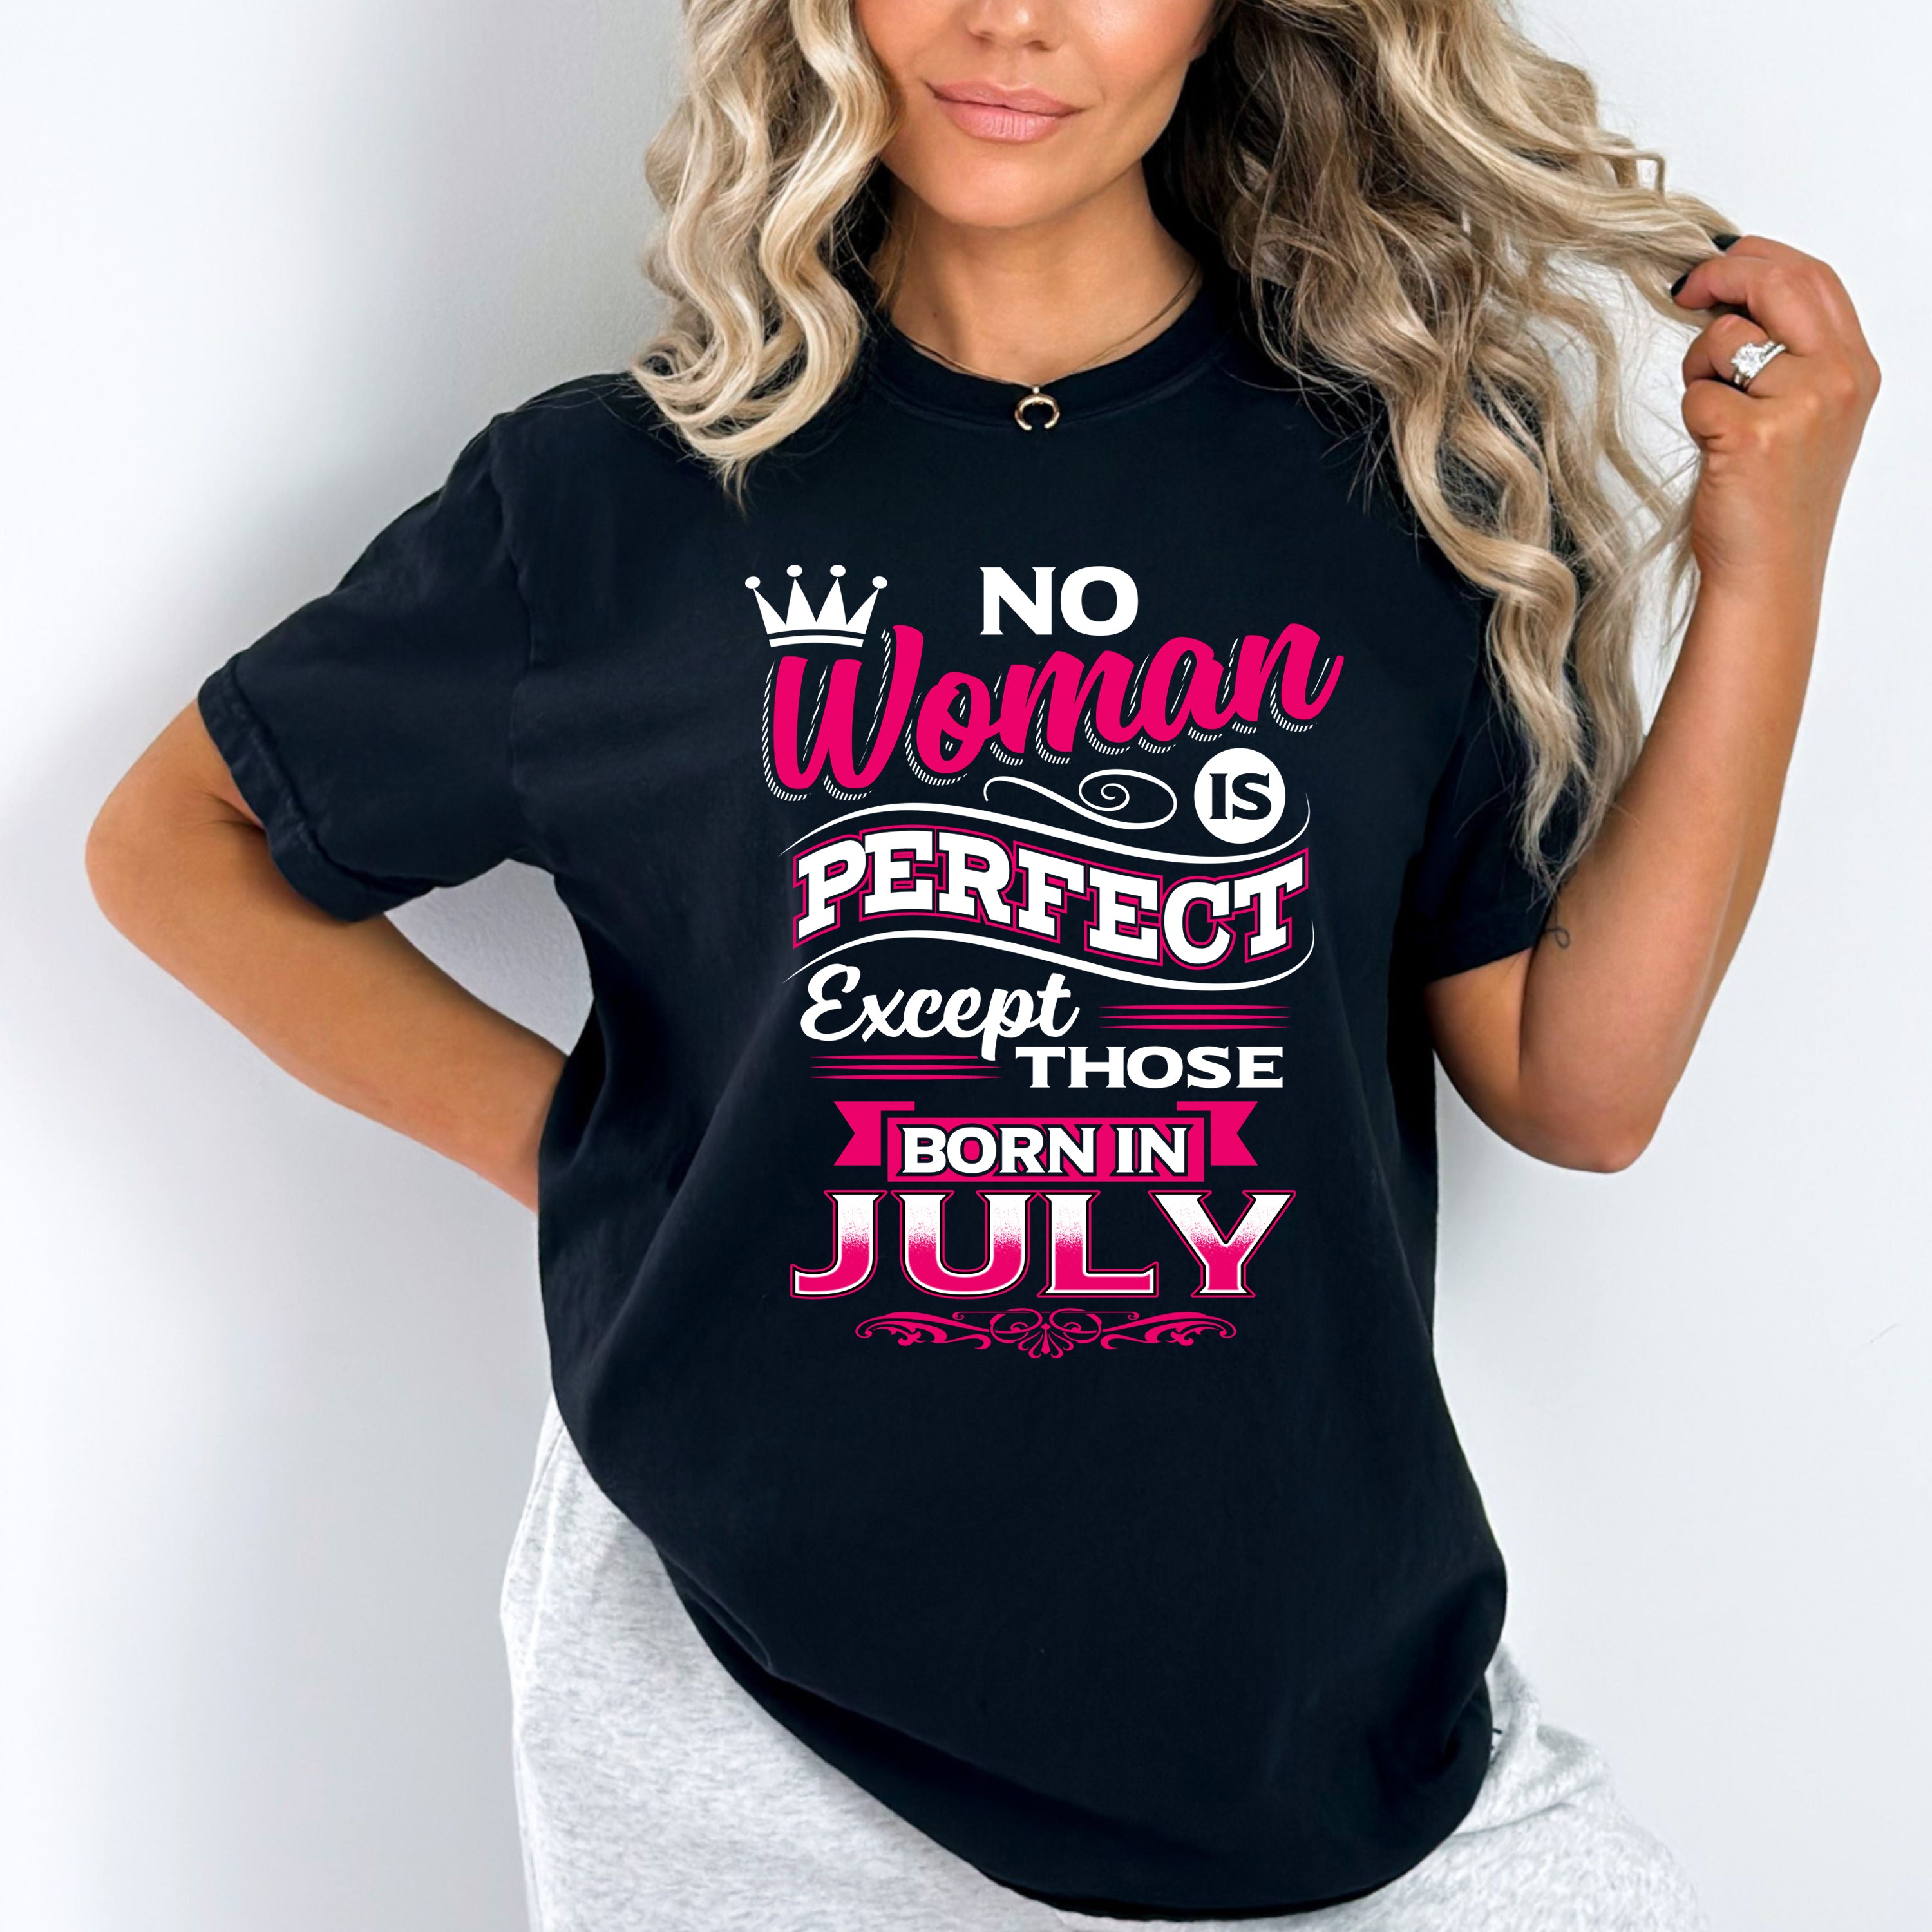 "No Woman Is Perfect Except Those Born In July"